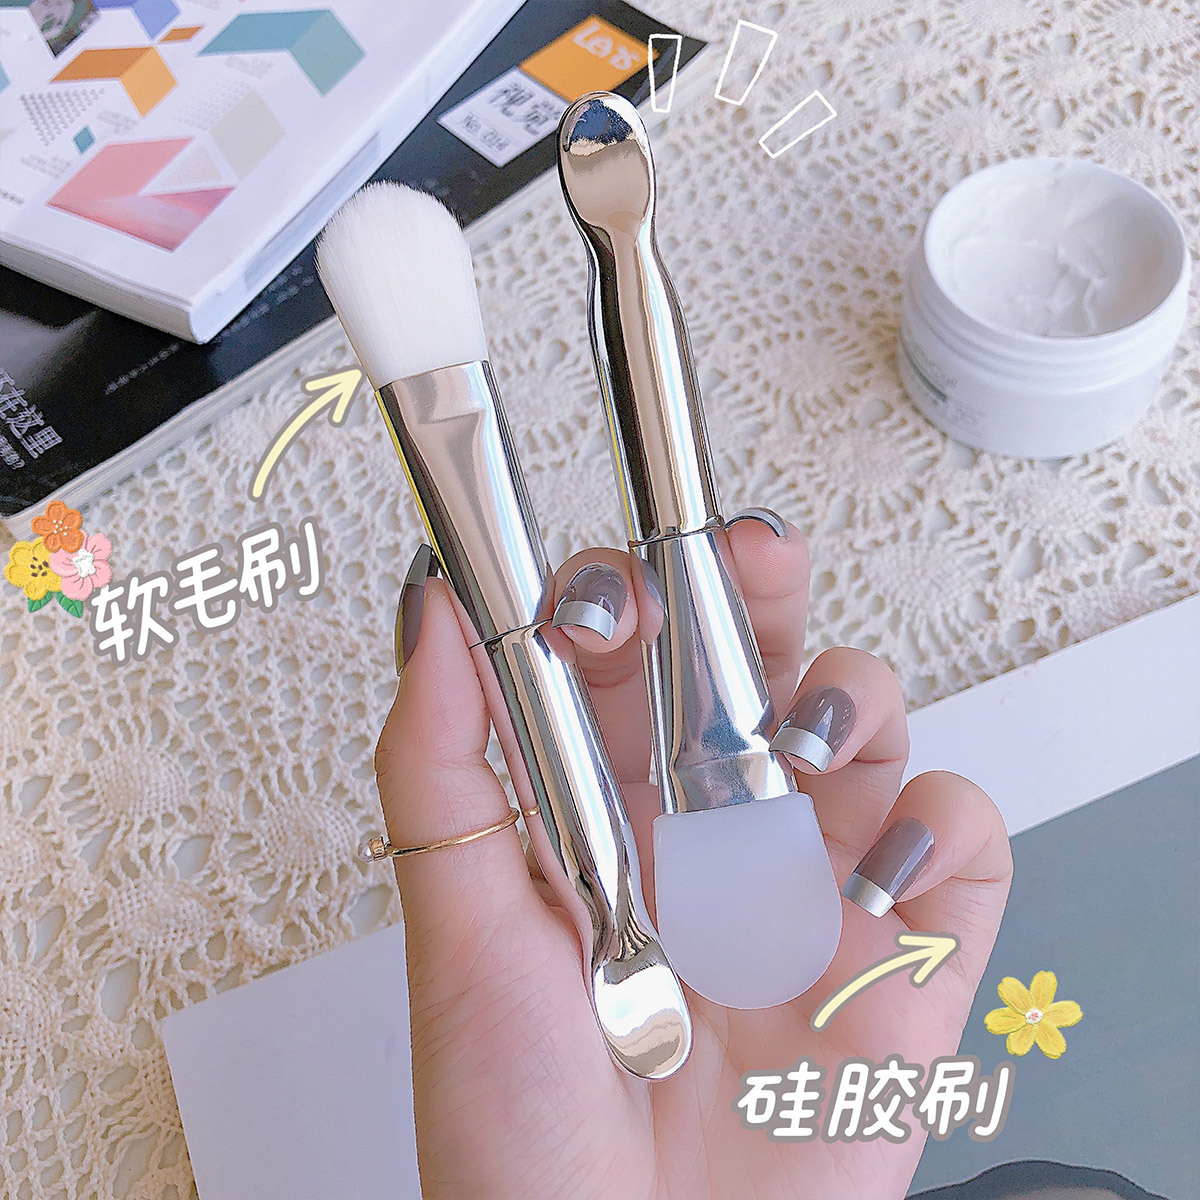 Jonbos Double-Headed Facial Treatment Brush Soft Bristles Silicone Makeup Brush Clay Mask Special Scoop Multi-Functional Facial Mask Applicator Brush